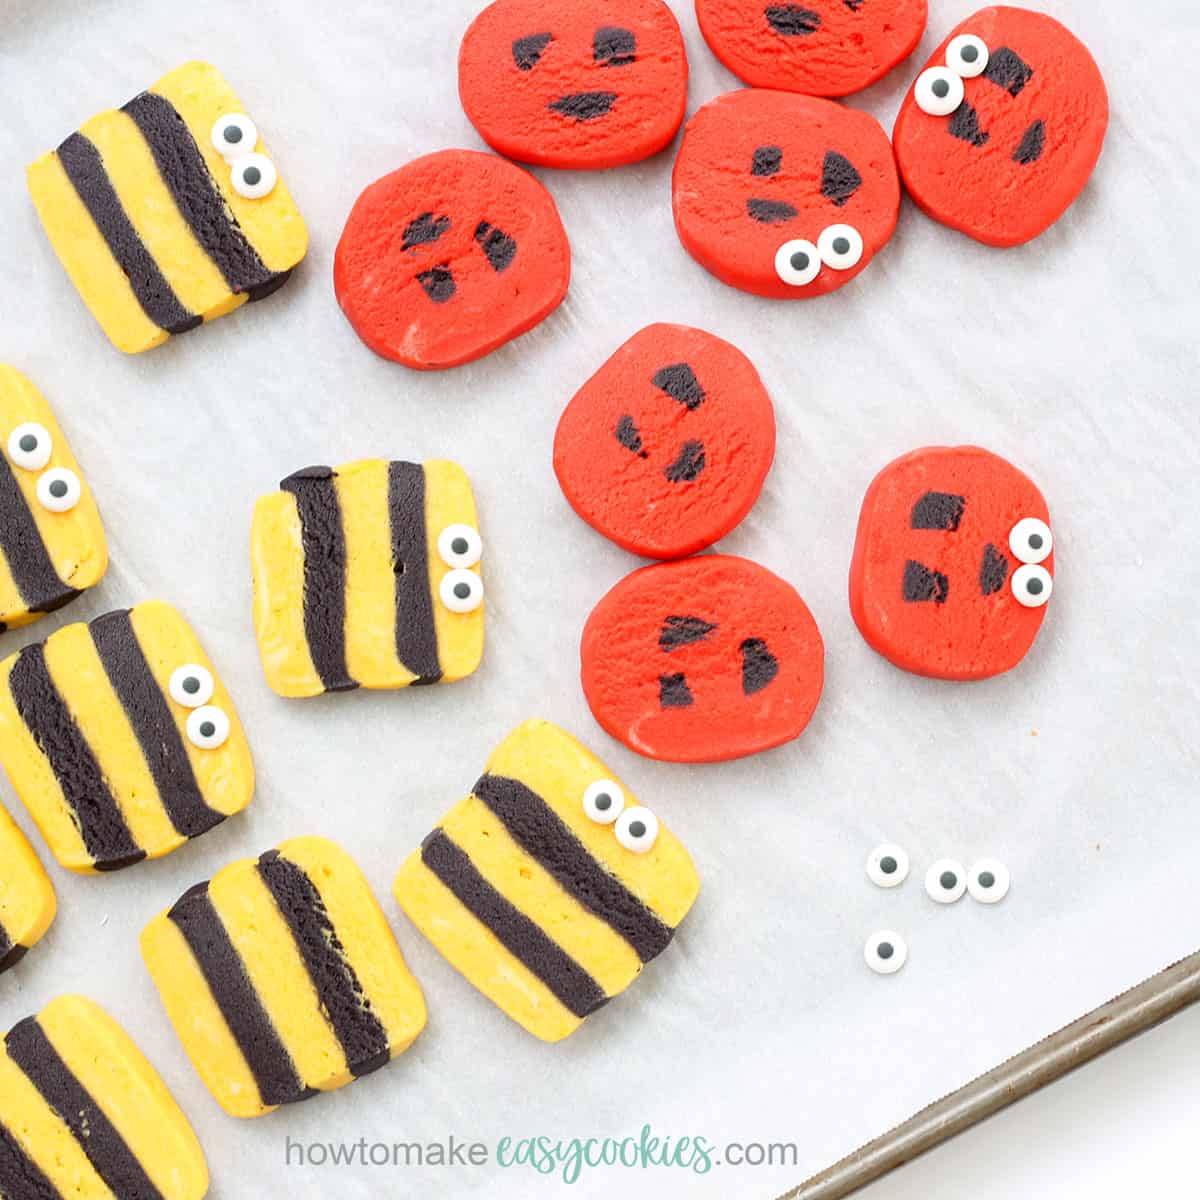 ladybug and bumble bee cookies with candy eyes on baking tray